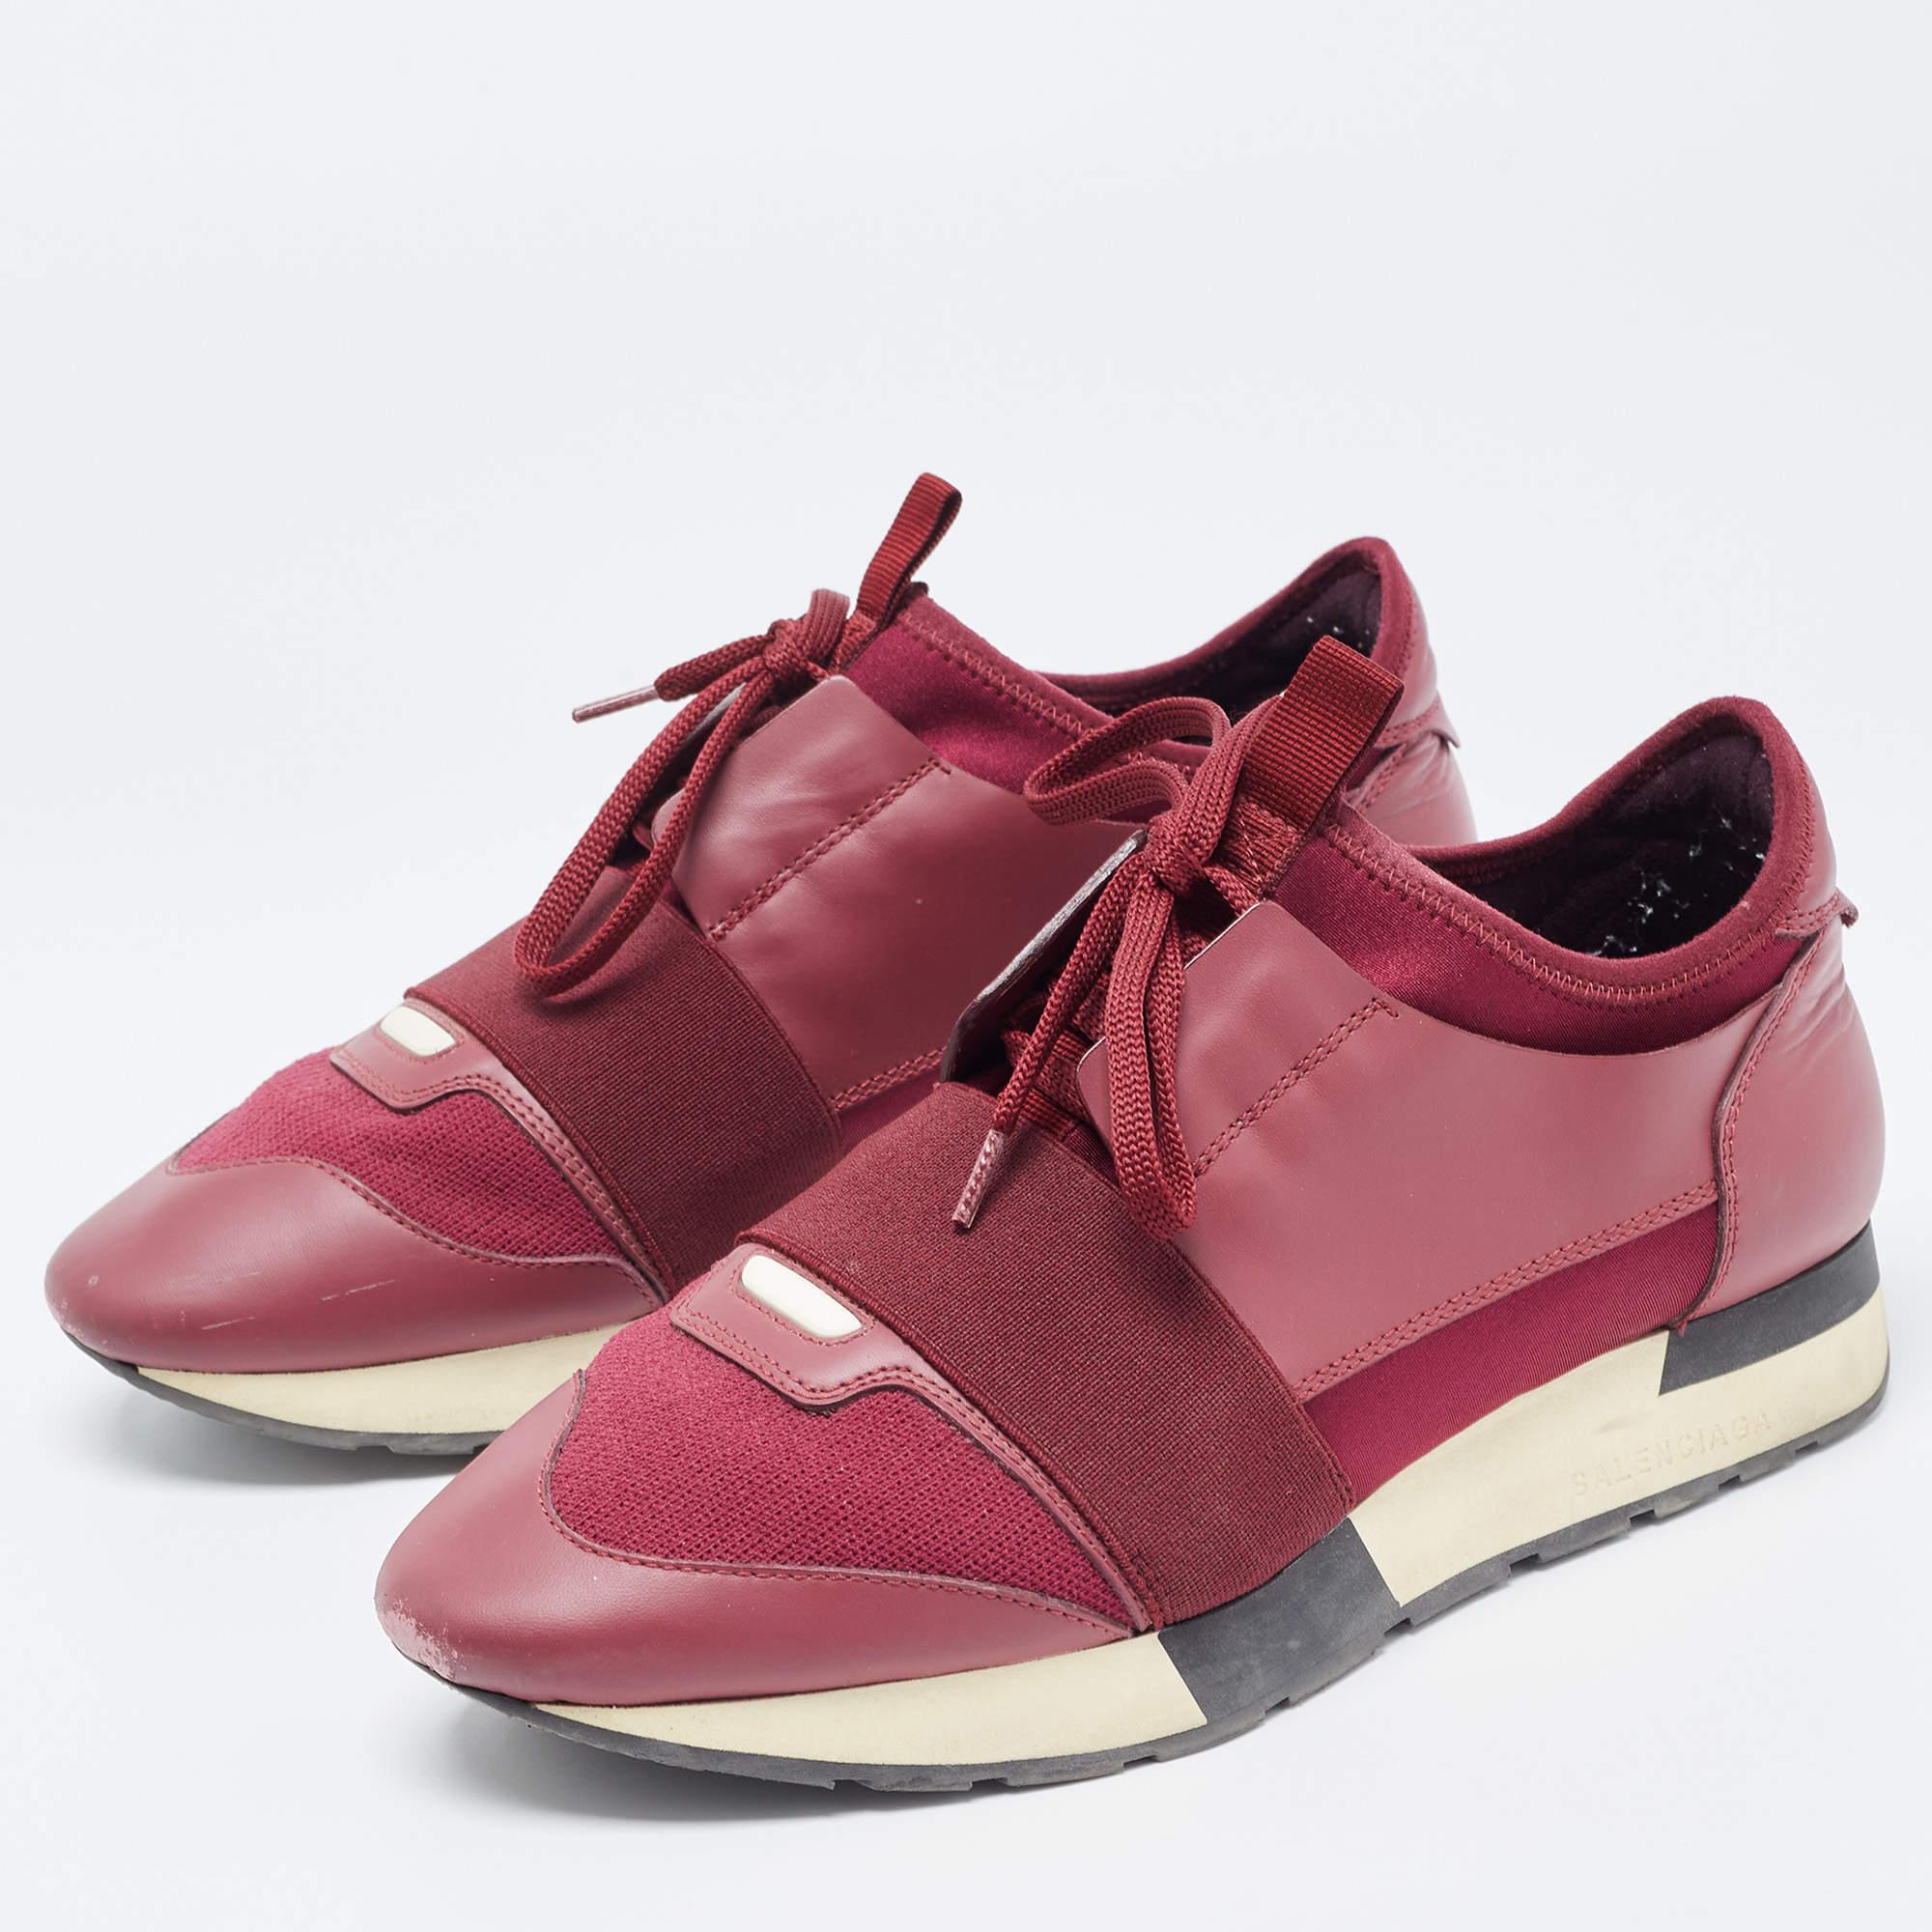 Balenciaga Burgundy Leather and Fabric Race Runner Sneakers Size 39 In Good Condition For Sale In Dubai, Al Qouz 2